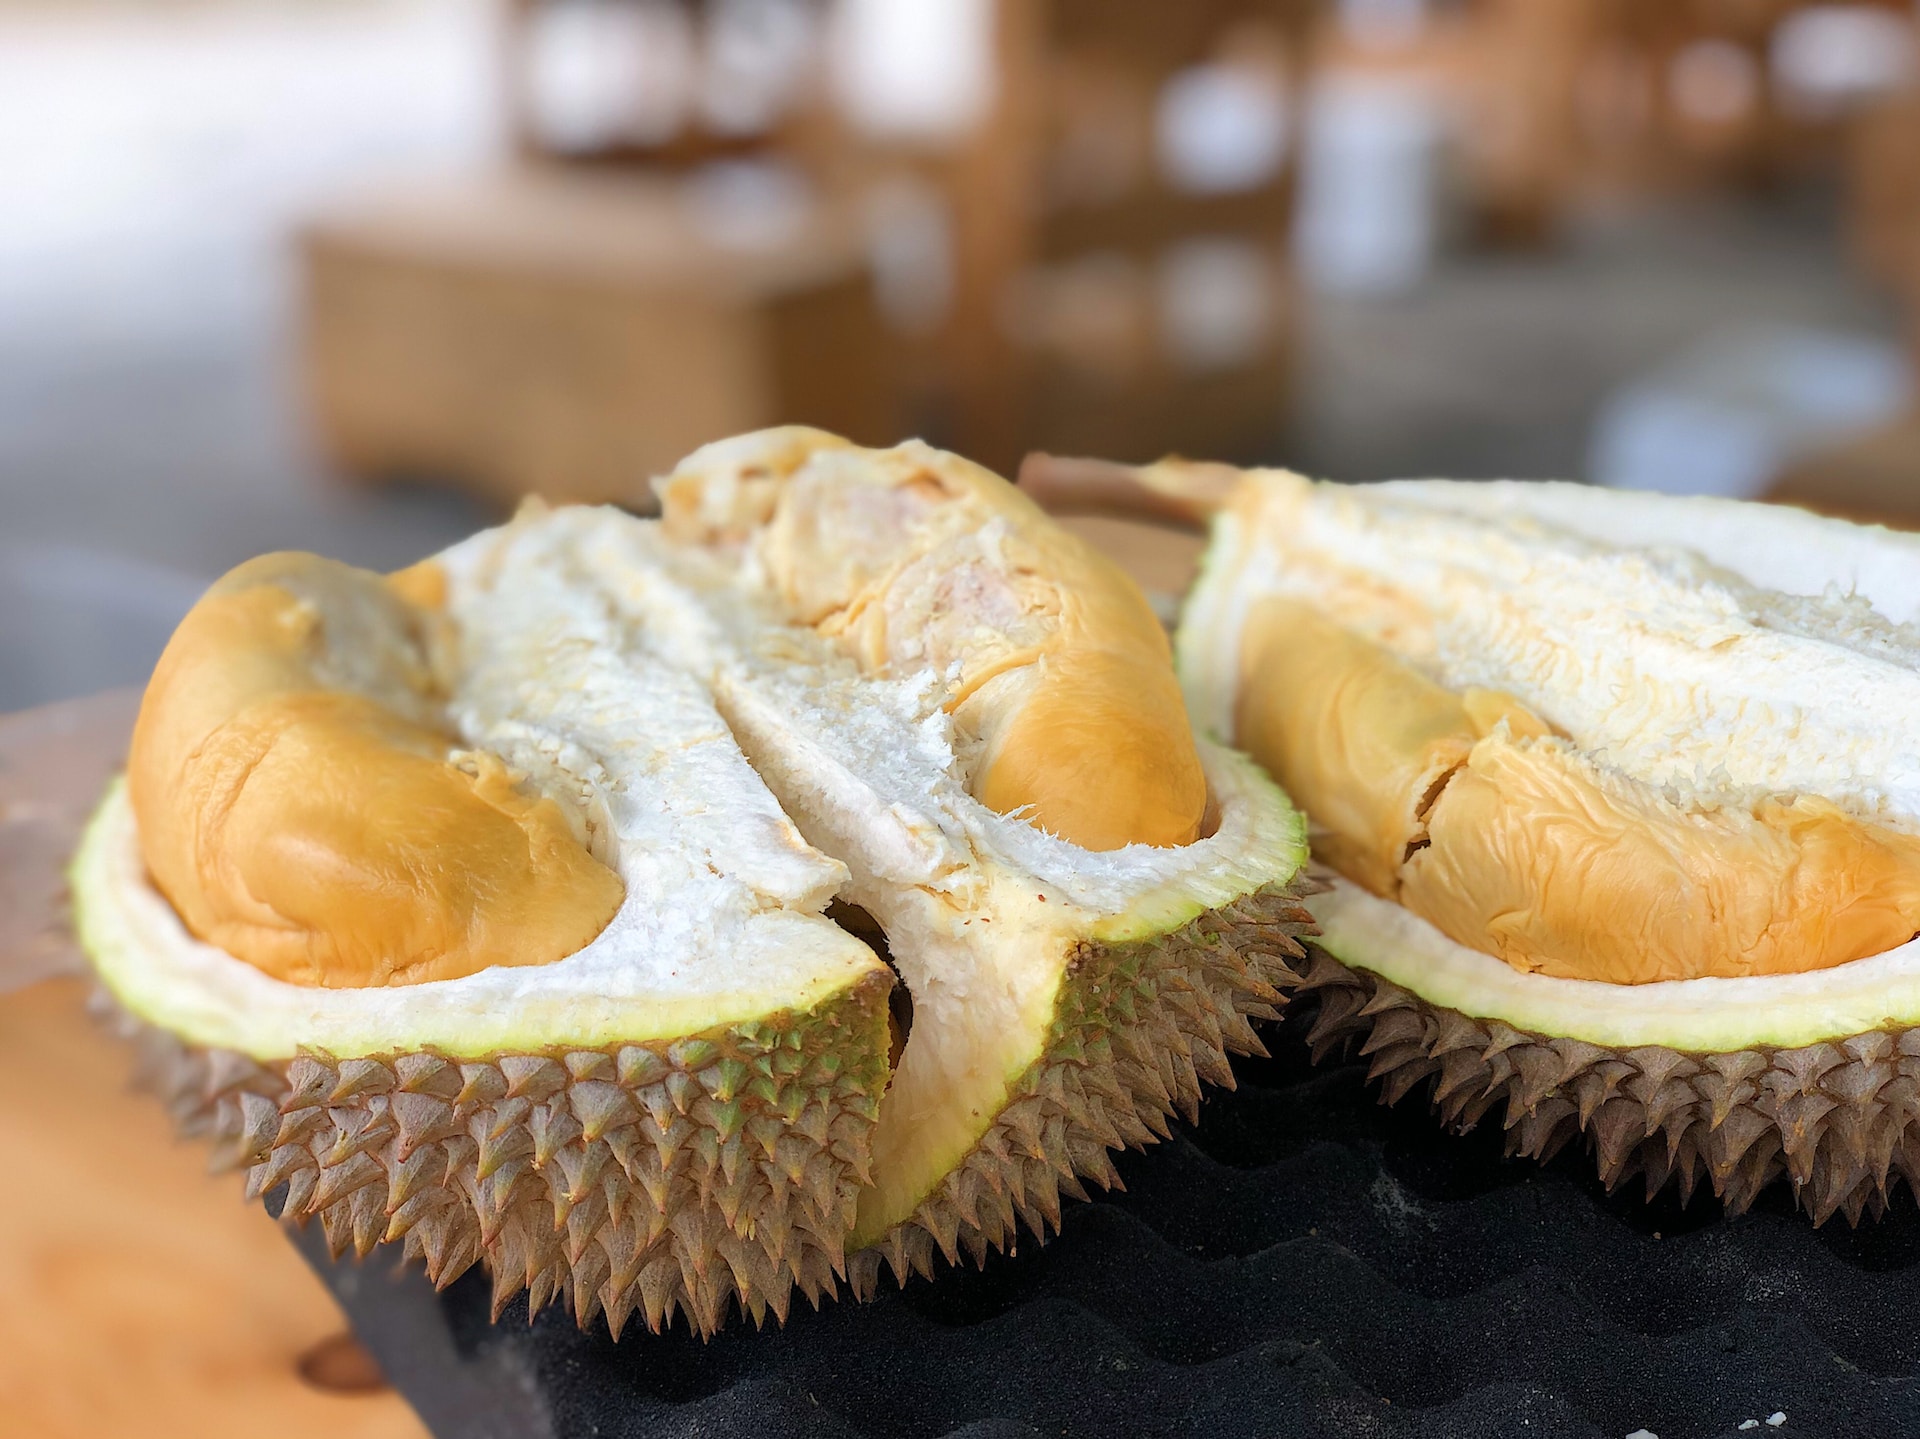 , 8 thorny questions you’ve always wanted to ask about durians, answered